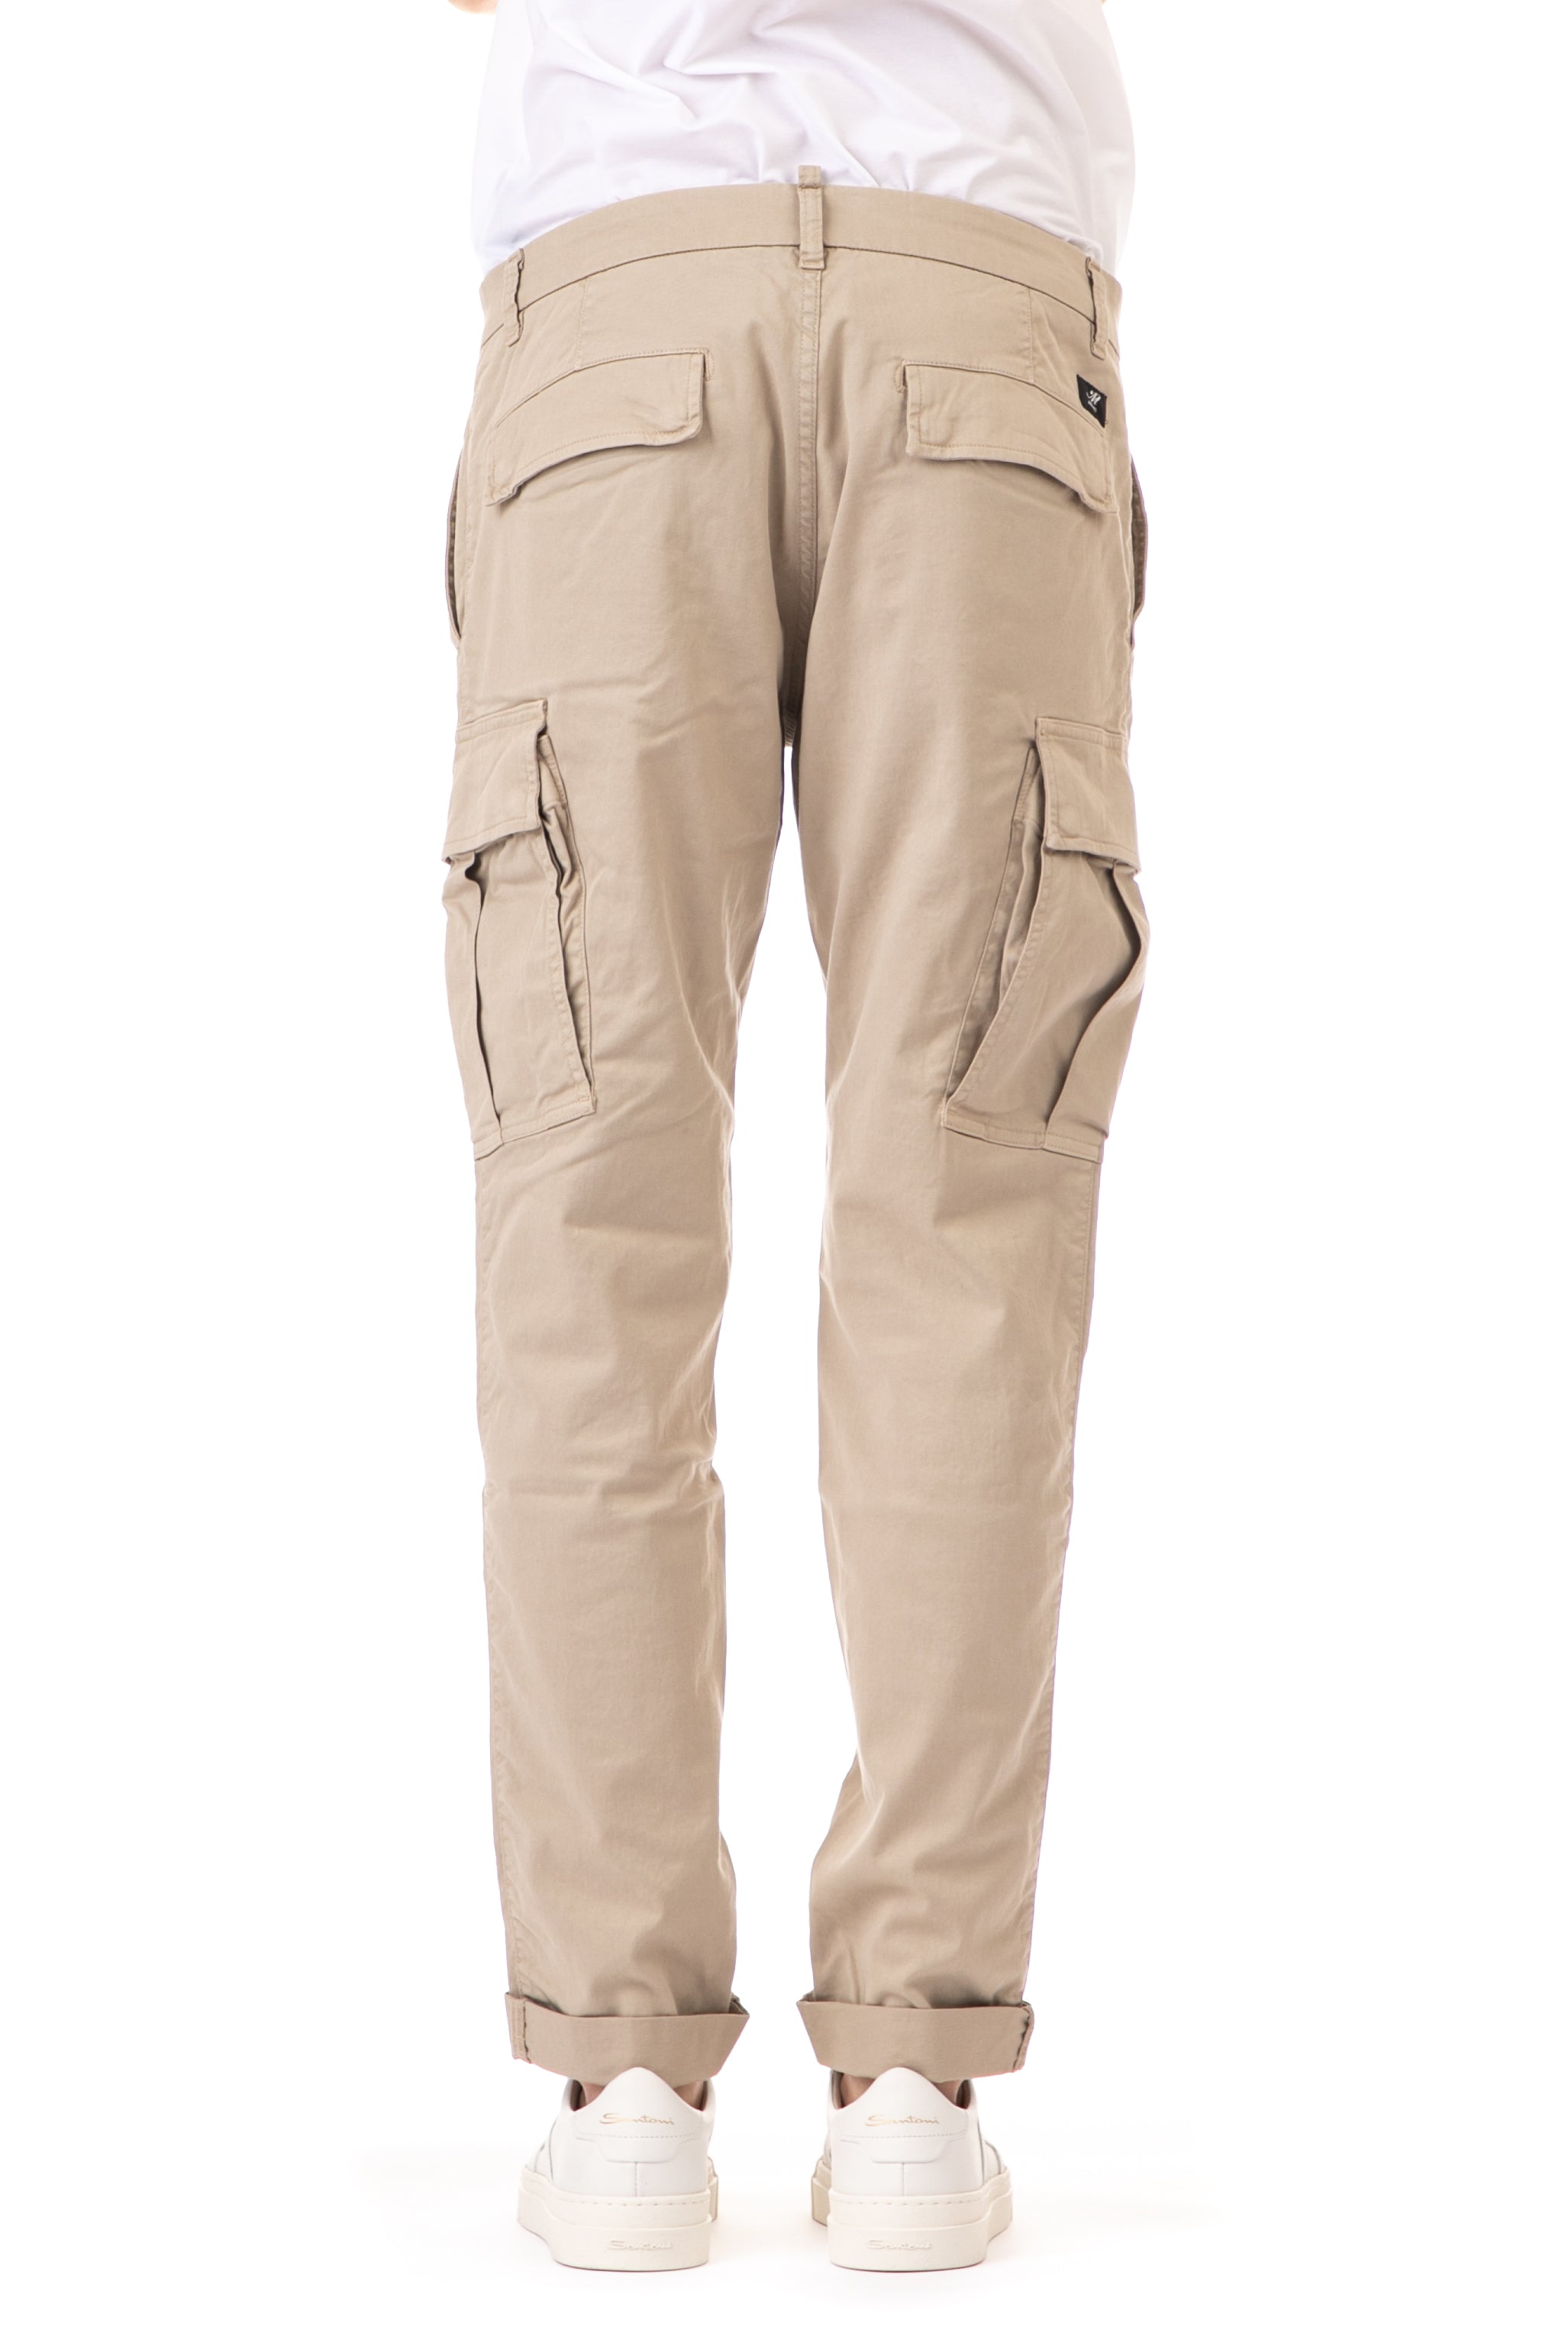 Airfield model cargo trousers in cotton-lyocell